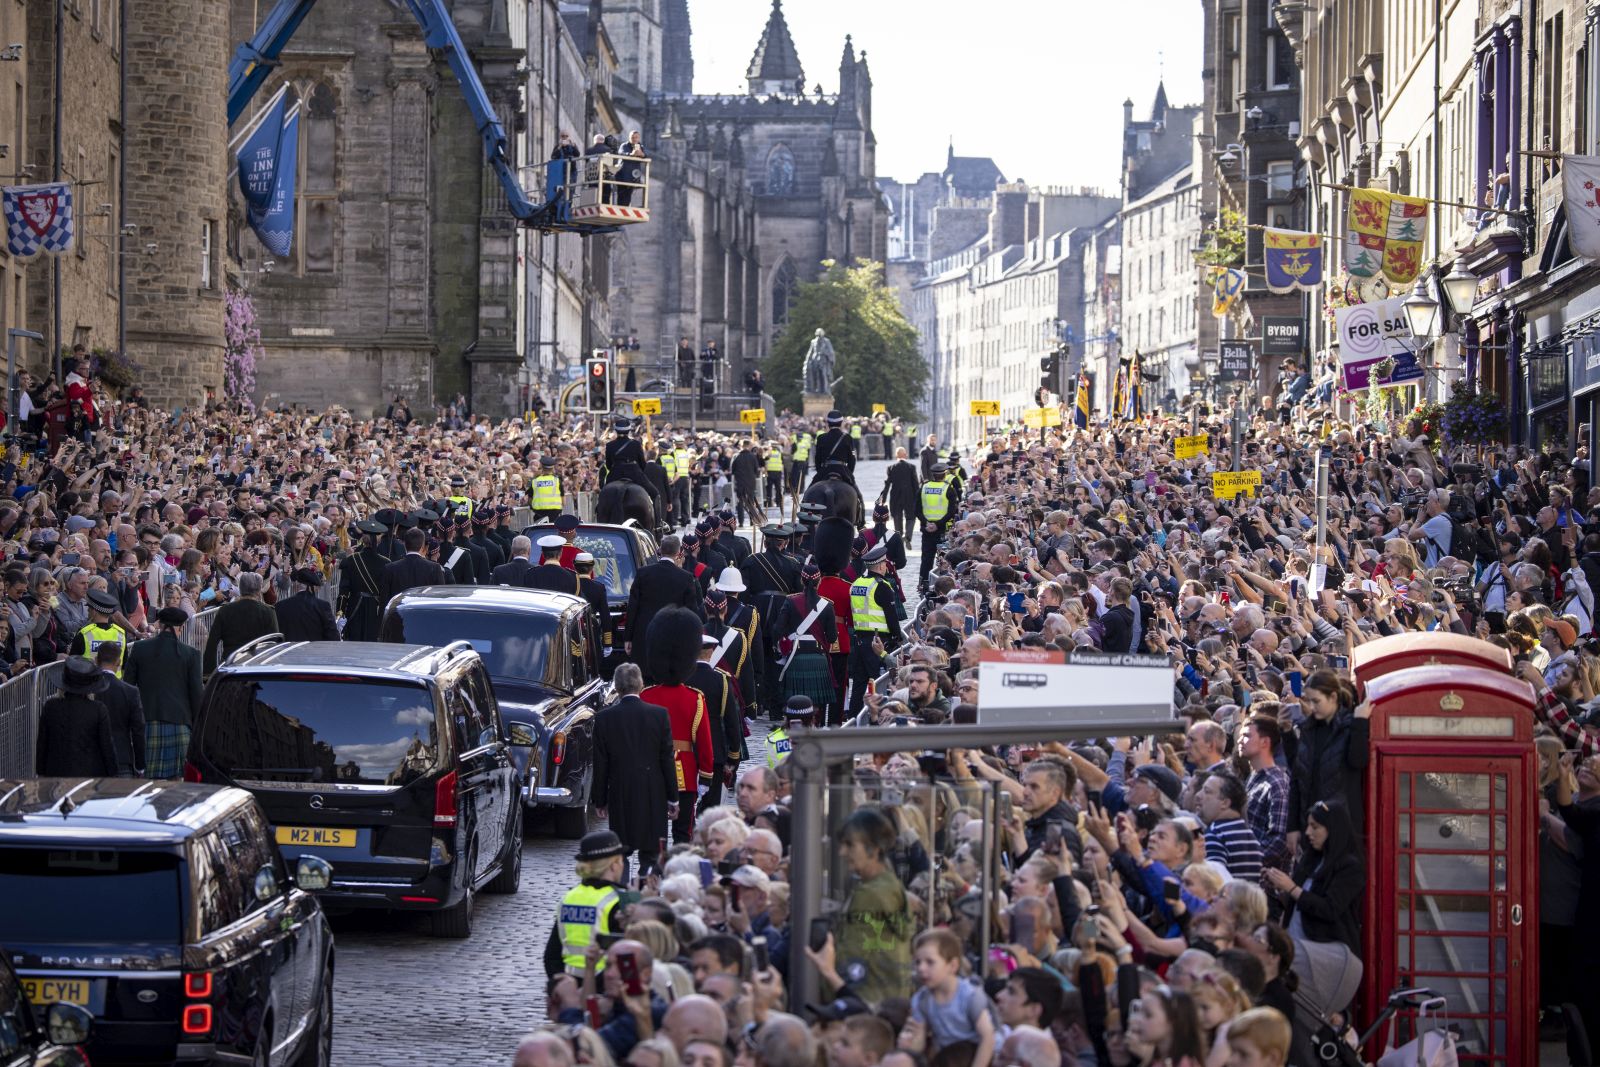 epa10180024 The procession of the coffin of Britain's late Queen Elizabeth II from the Palace of Holyroodhouse to St Giles' Cathedral accompanied by members of the royal family in Edinburgh, Scotland, Britain, 12 September 2022. Members of the public will be able to view the coffin to pay their respects for 24 hours before it is taken to London ahead of a period of lying in state.  EPA/TOLGA AKMEN